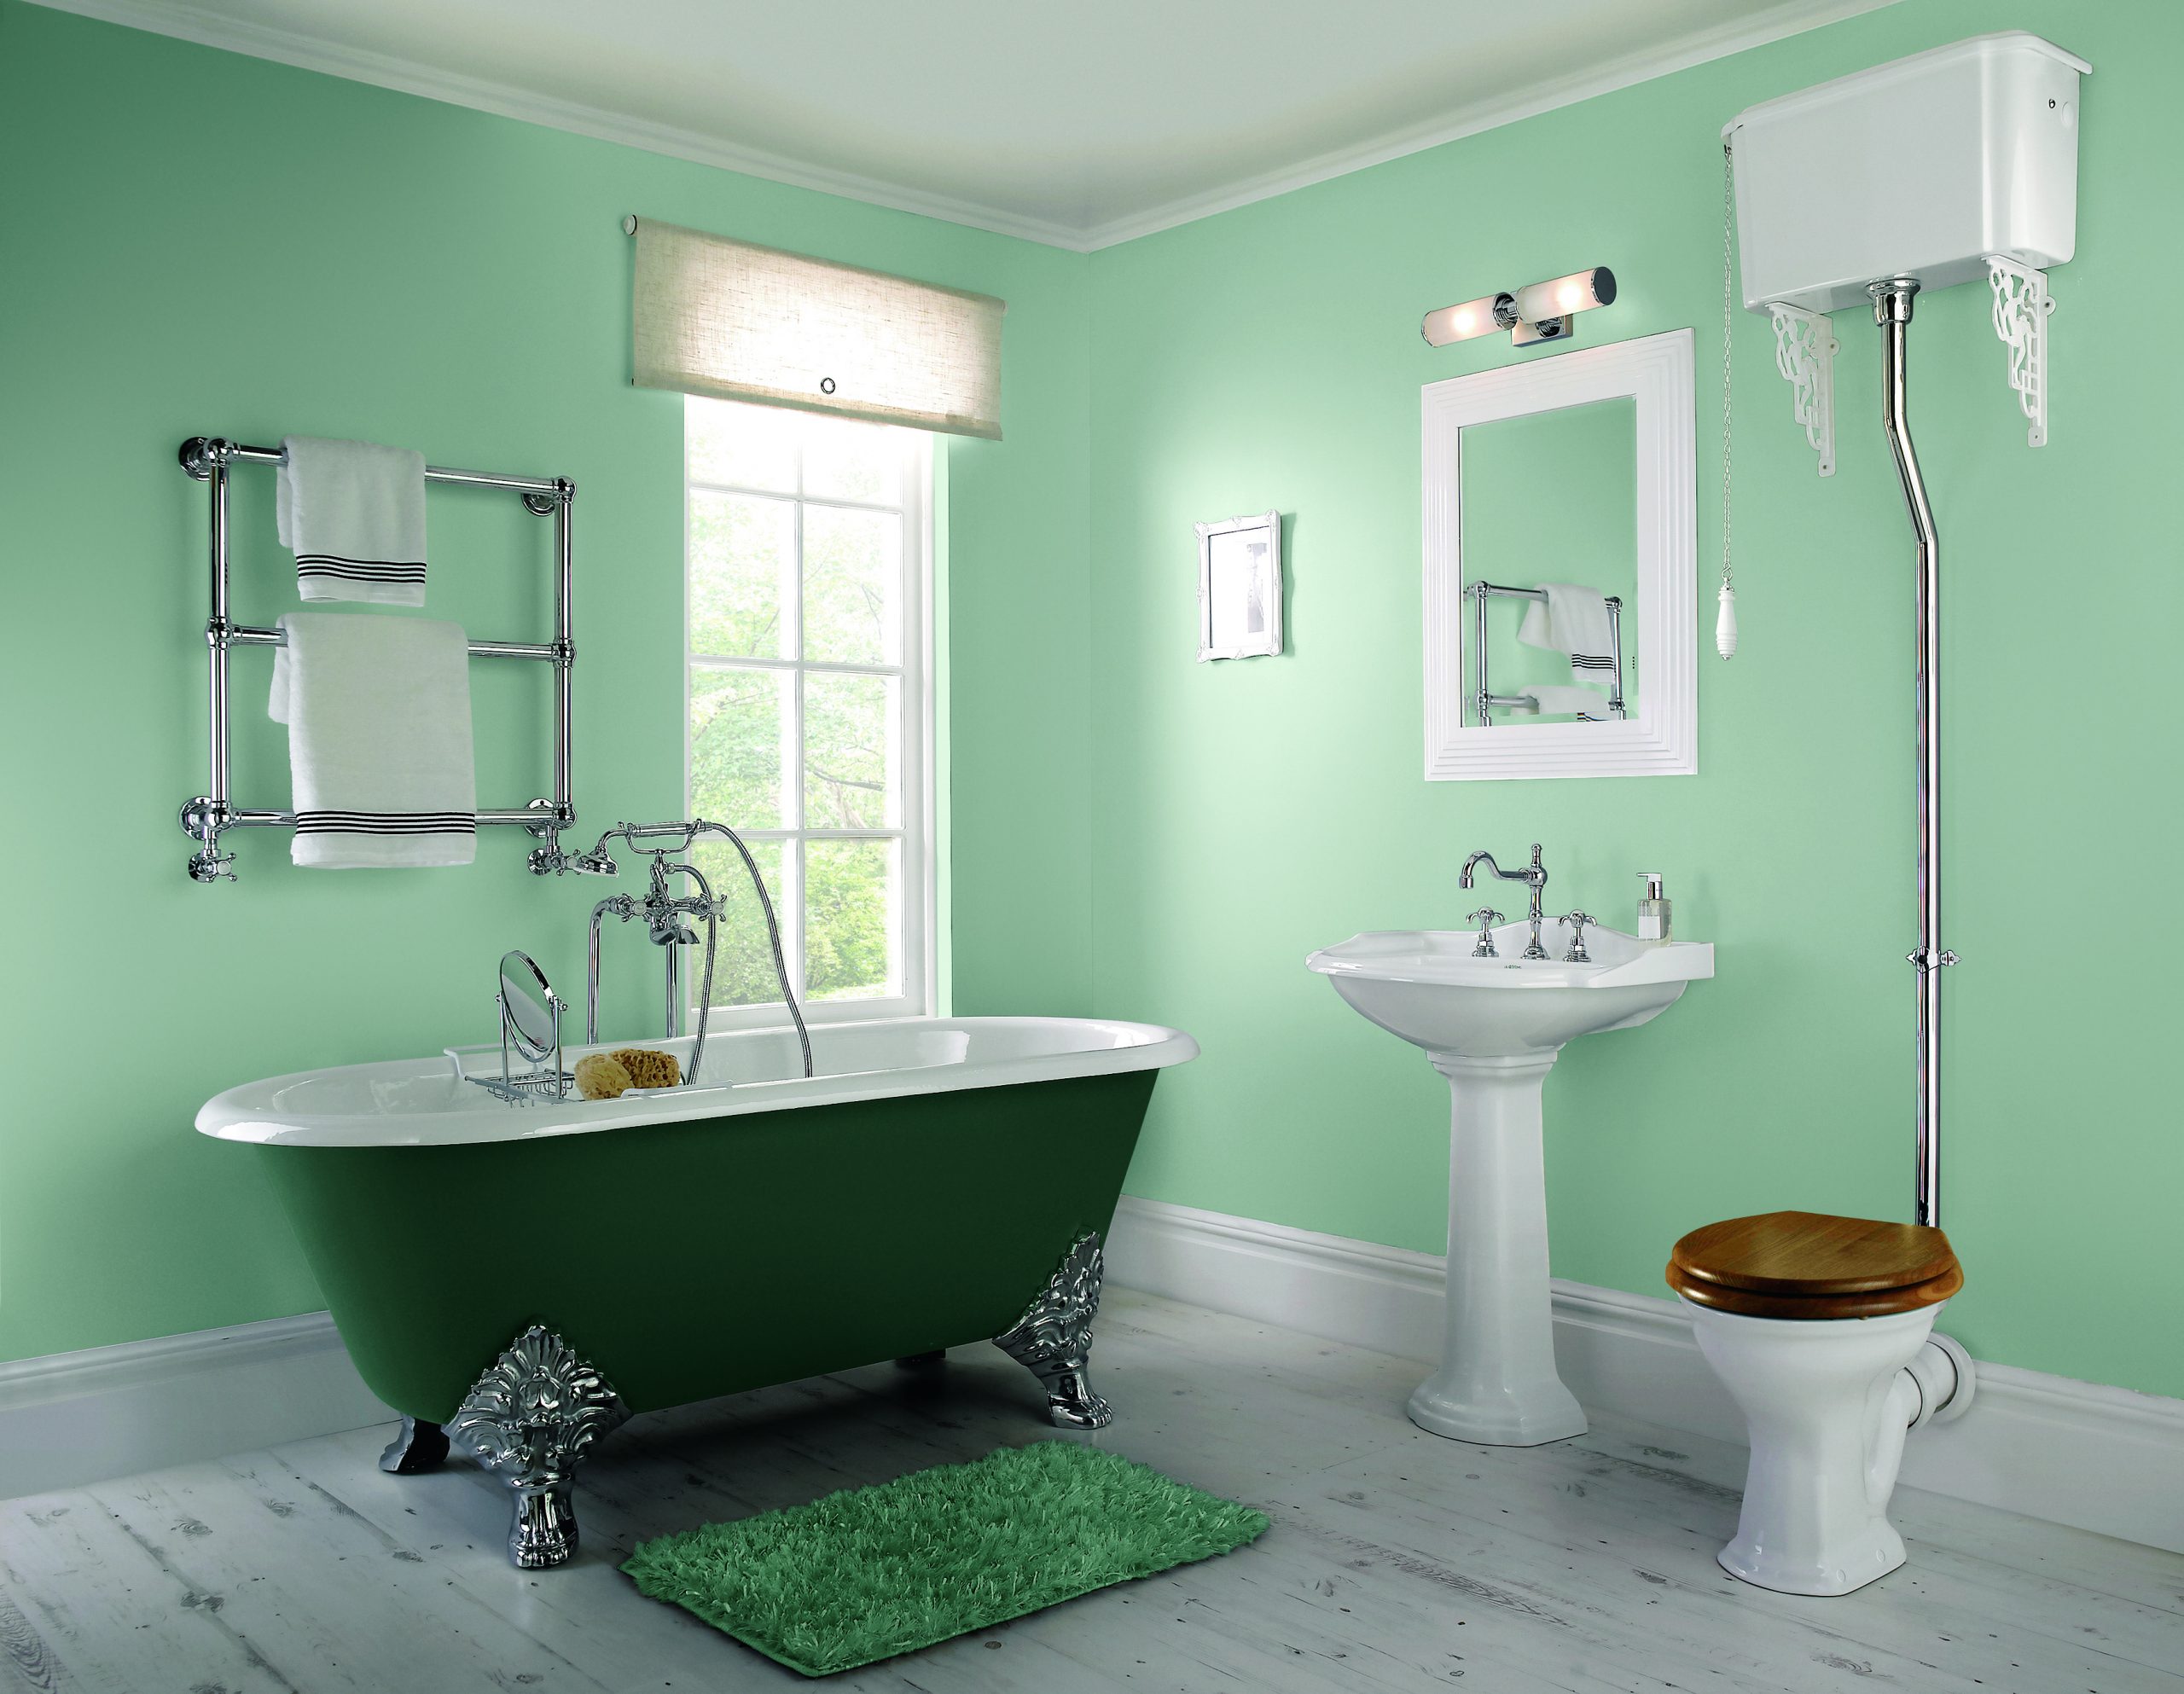 How to guide on designing the perfect bathroom with Imperial Bathrooms